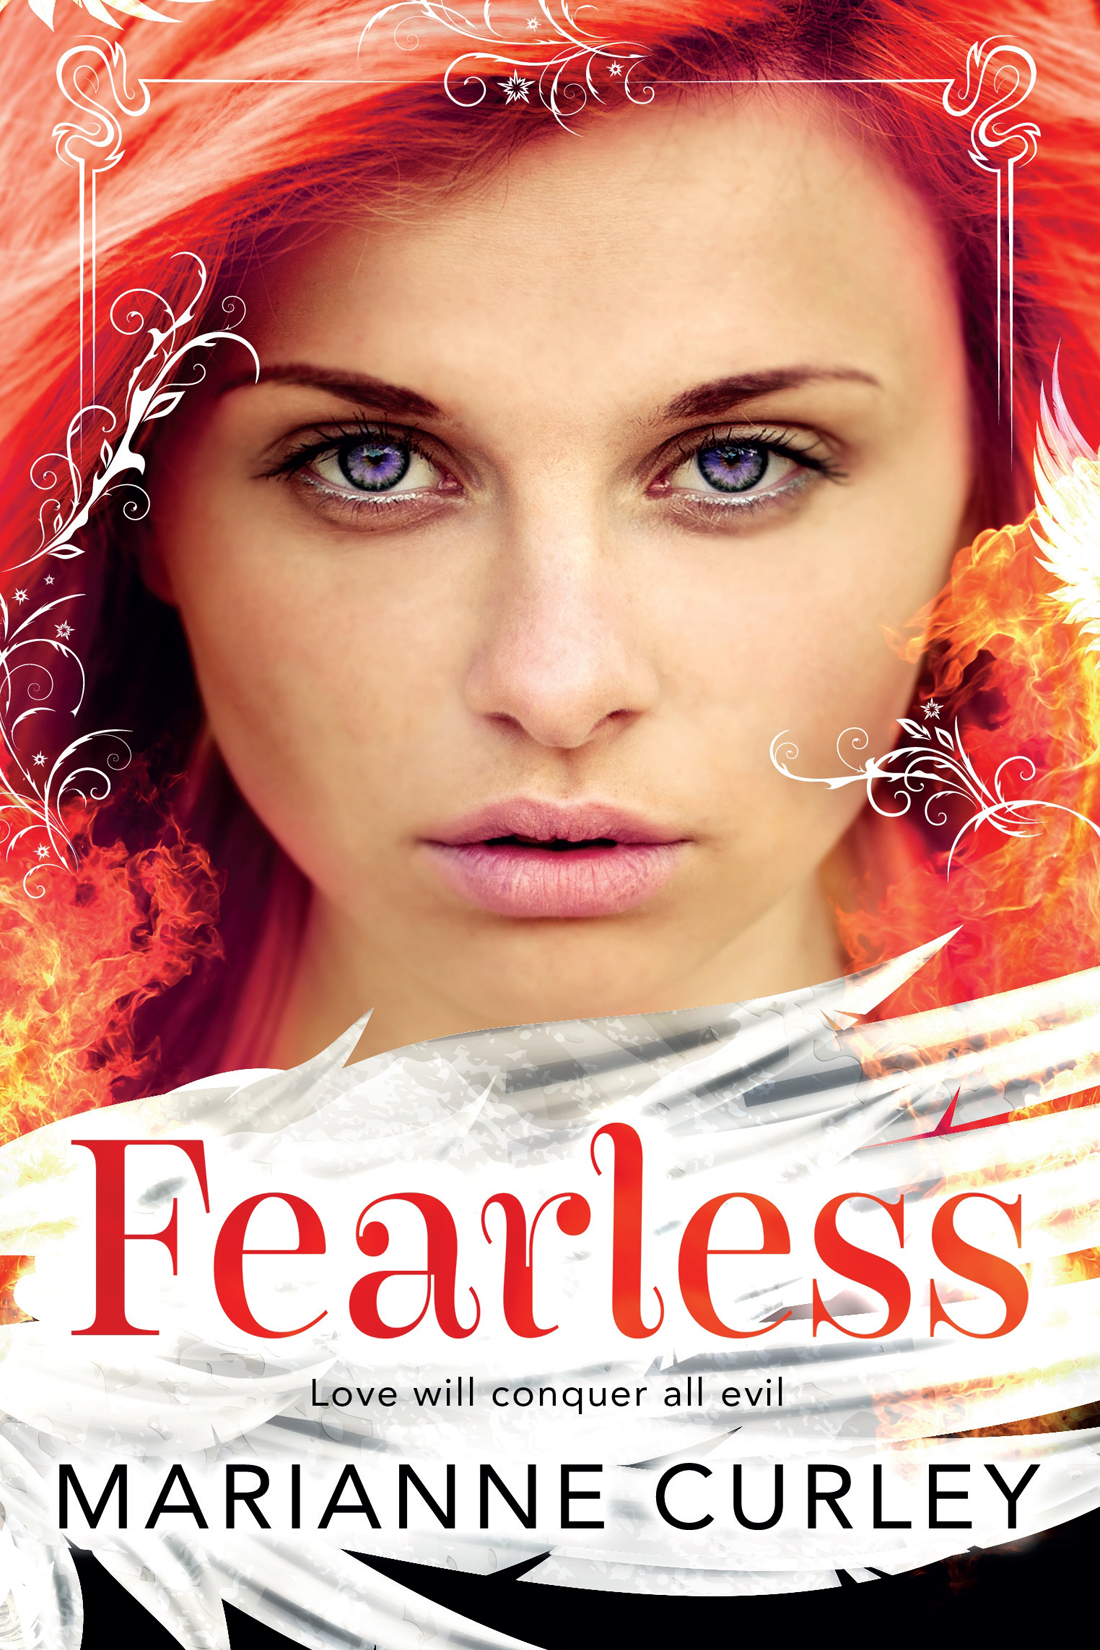 Fearless by Marianne Curley